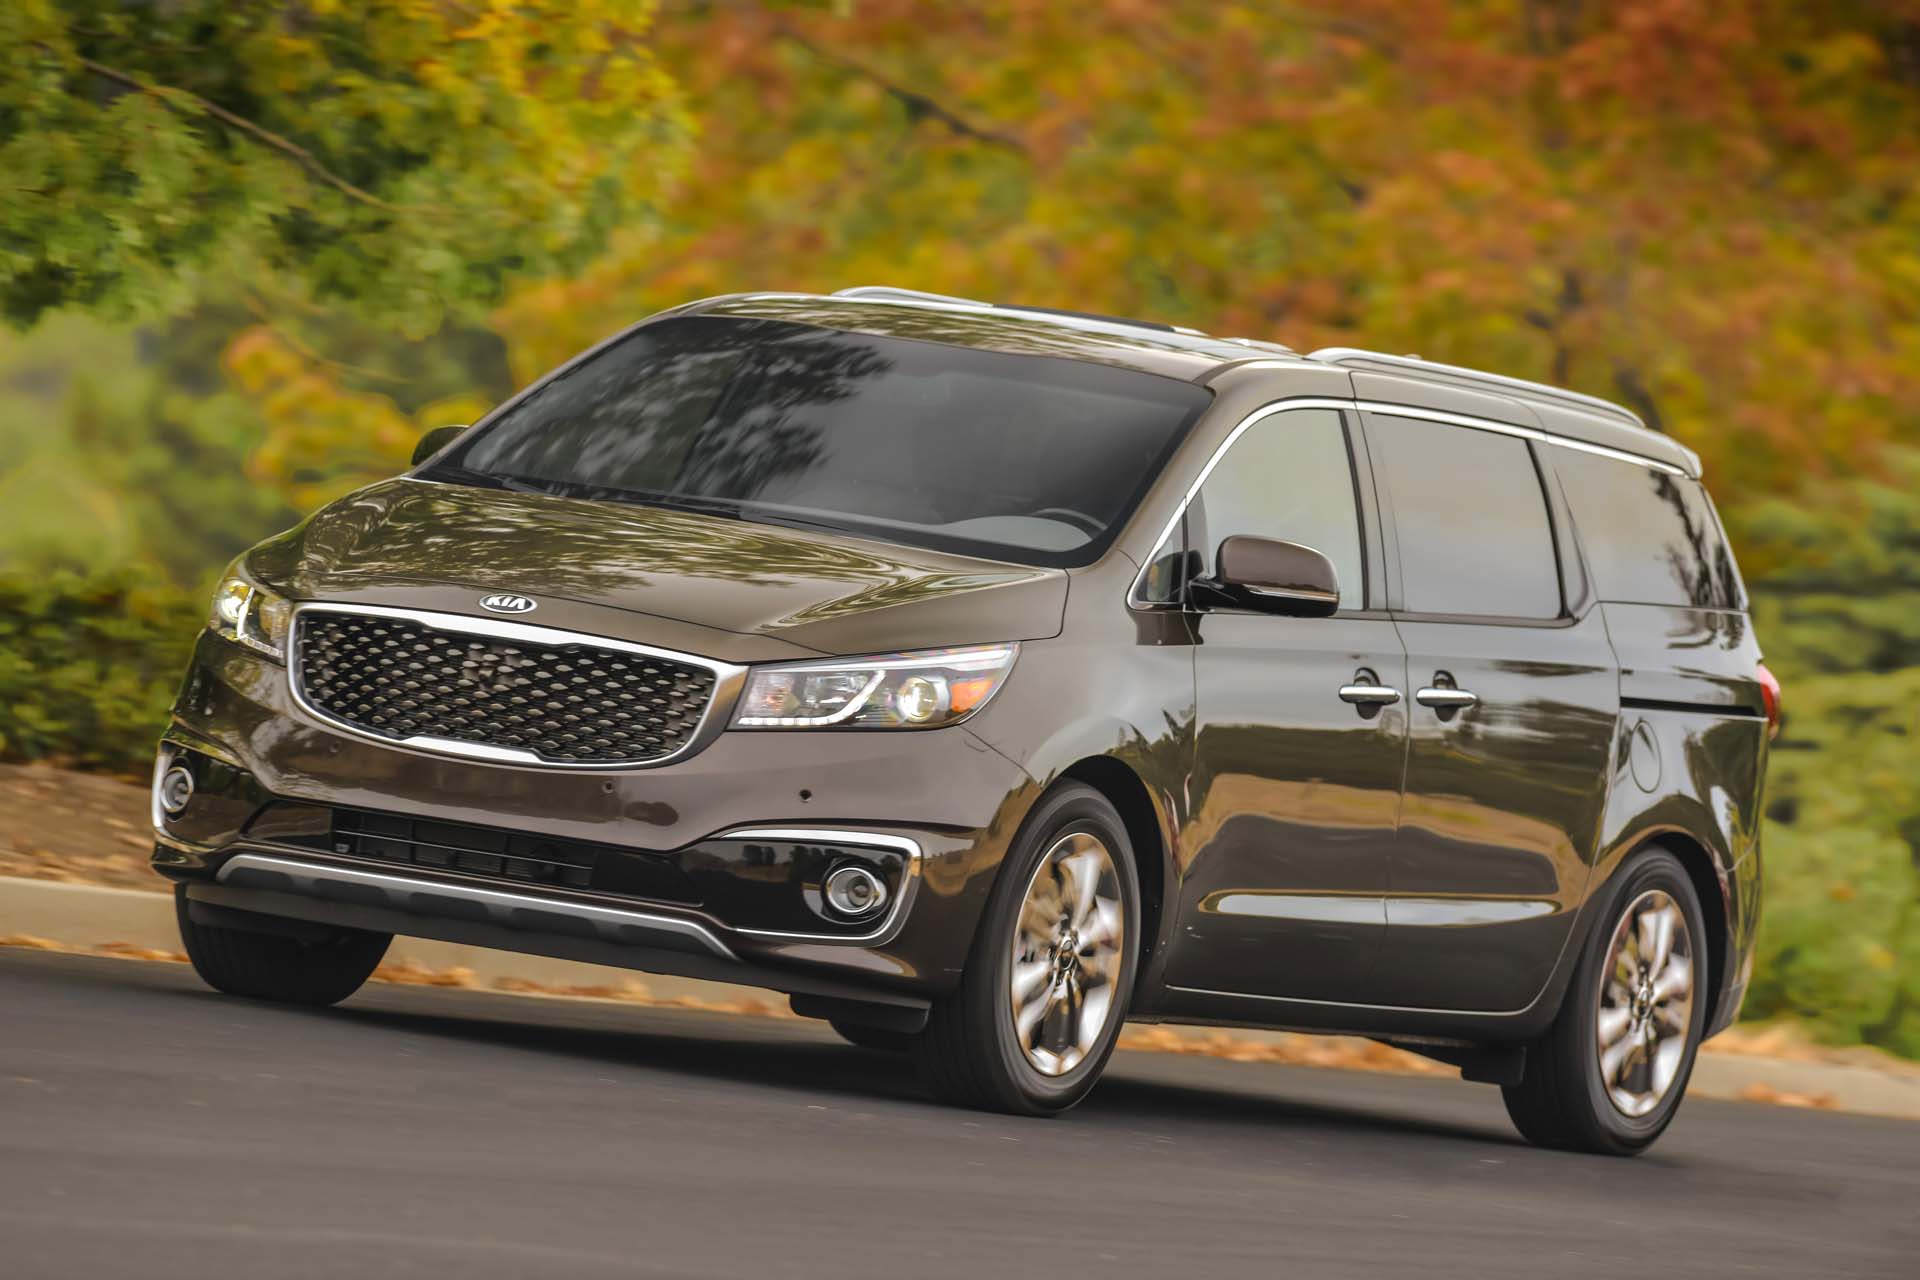 17 Kia Sedona Review Ratings Specs Prices And Photos The Car Connection